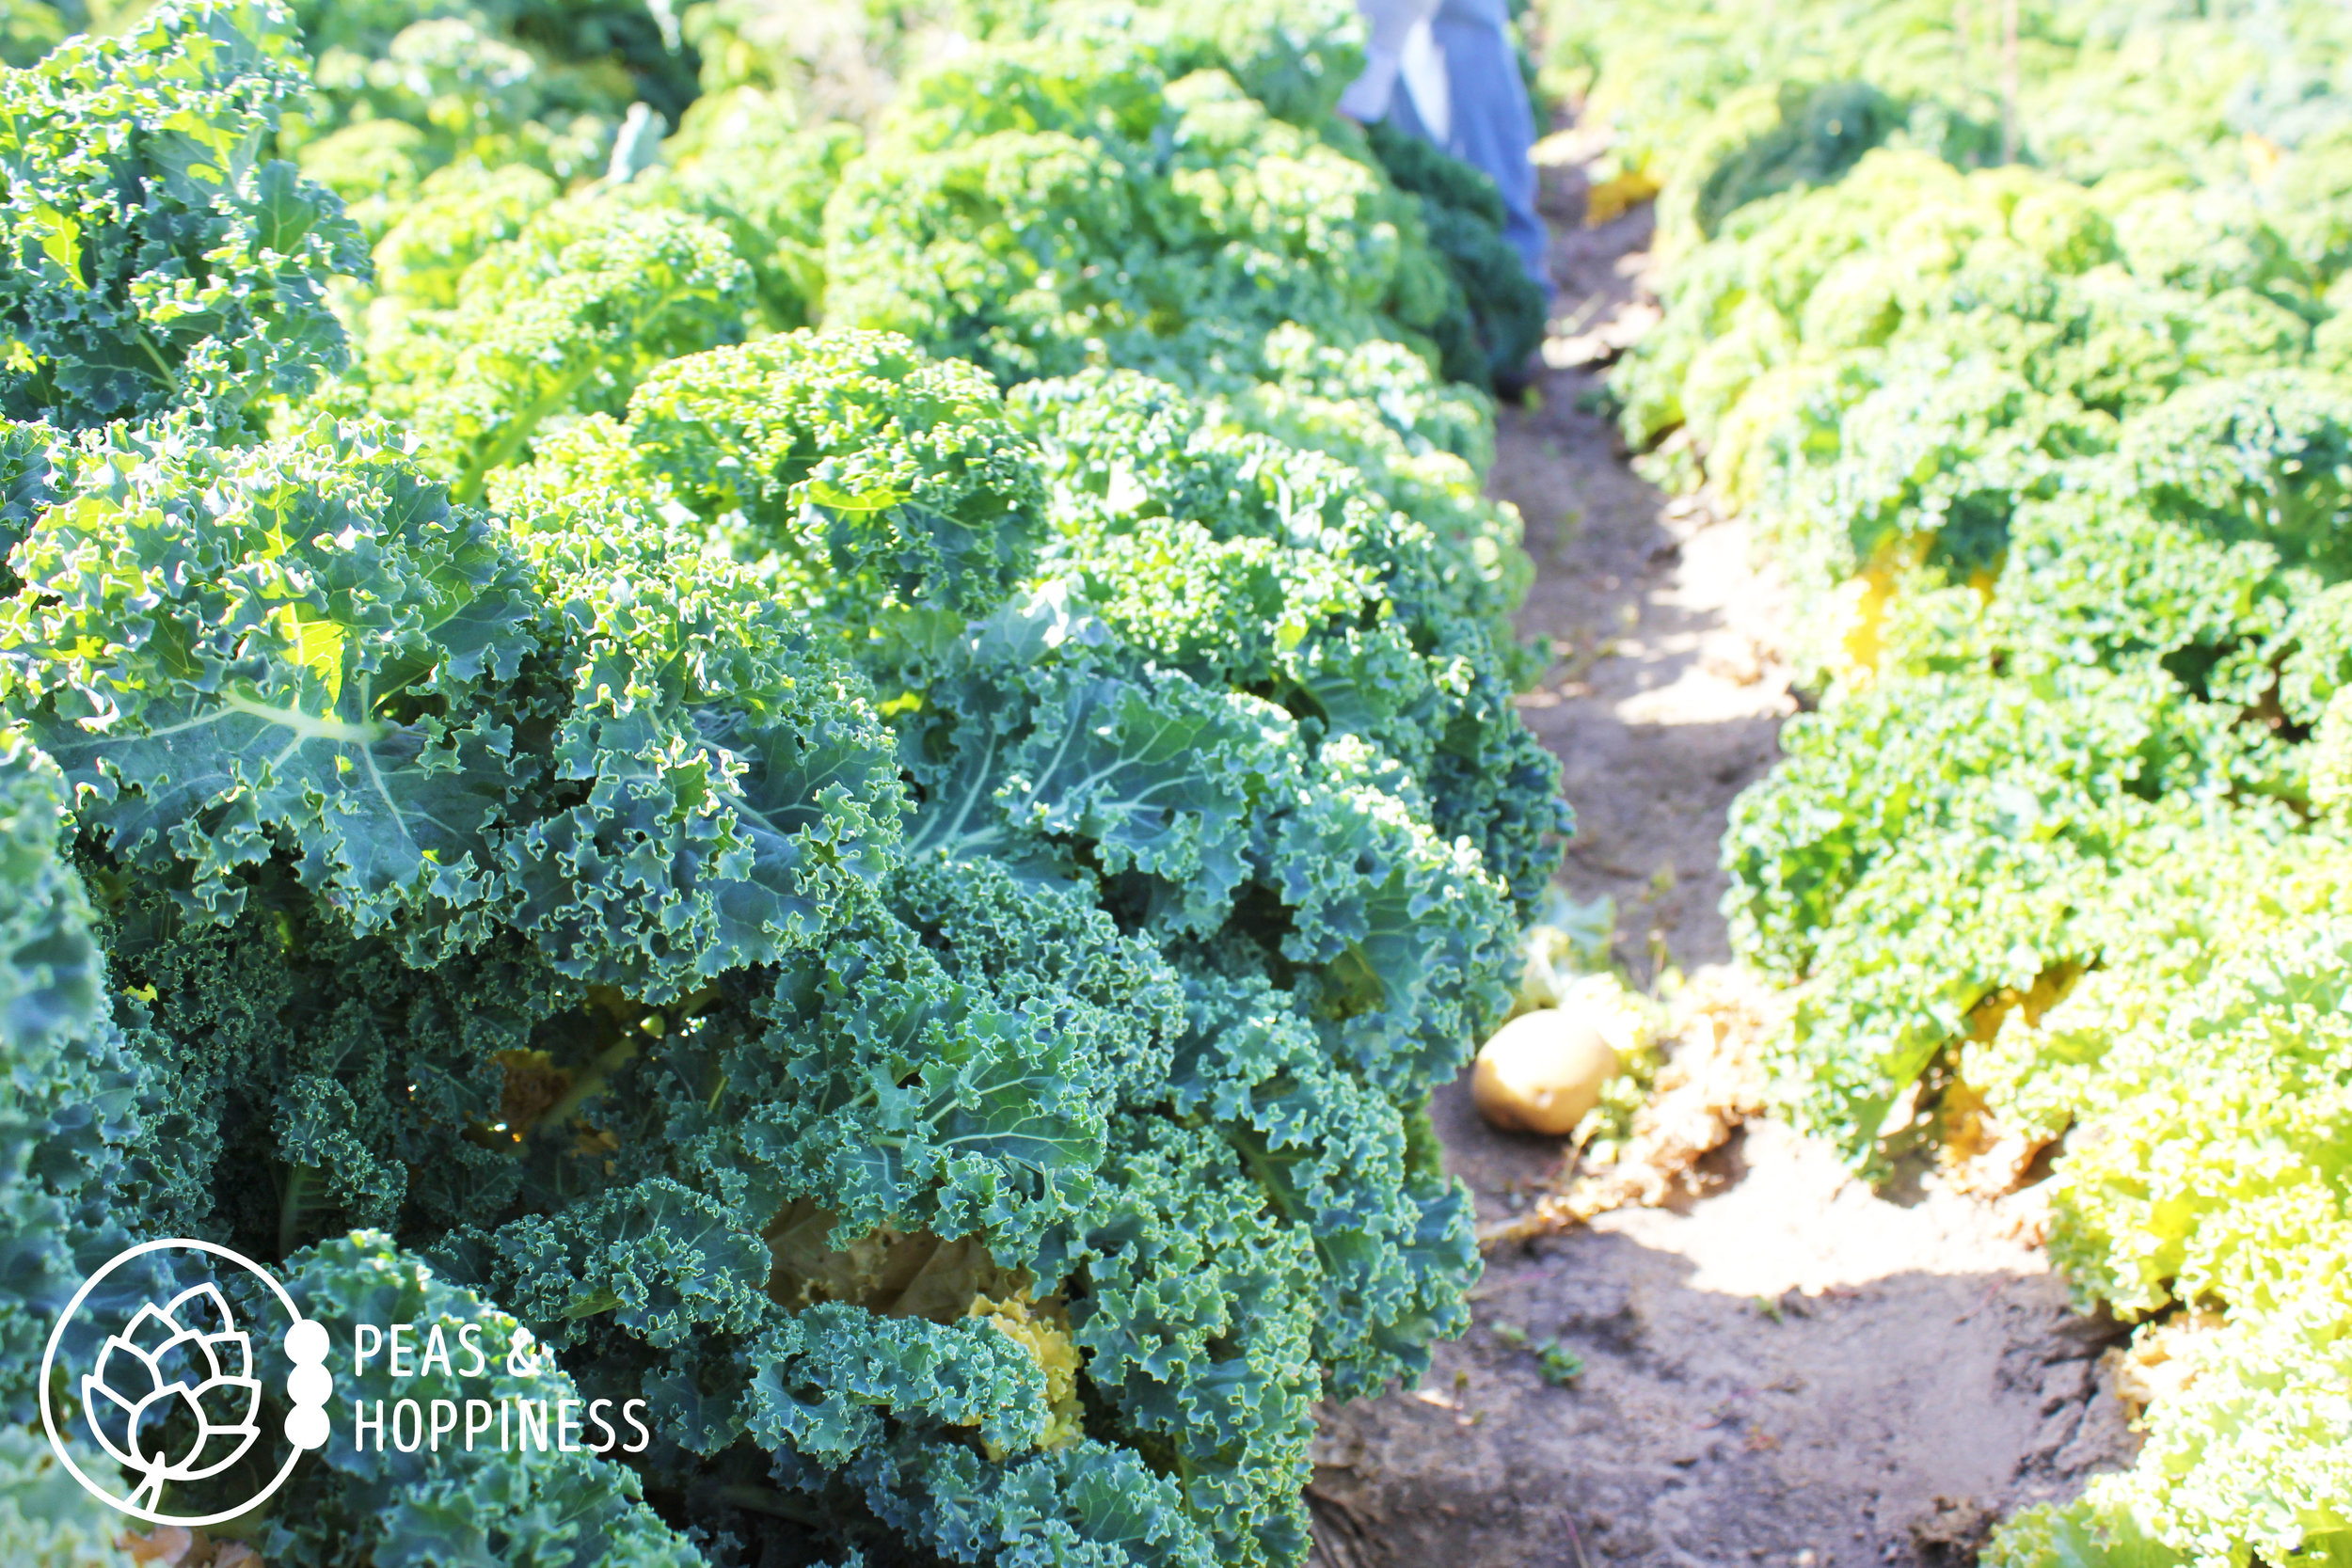 Beautiful kale ready for picking at Miller Farms' Fall Festival